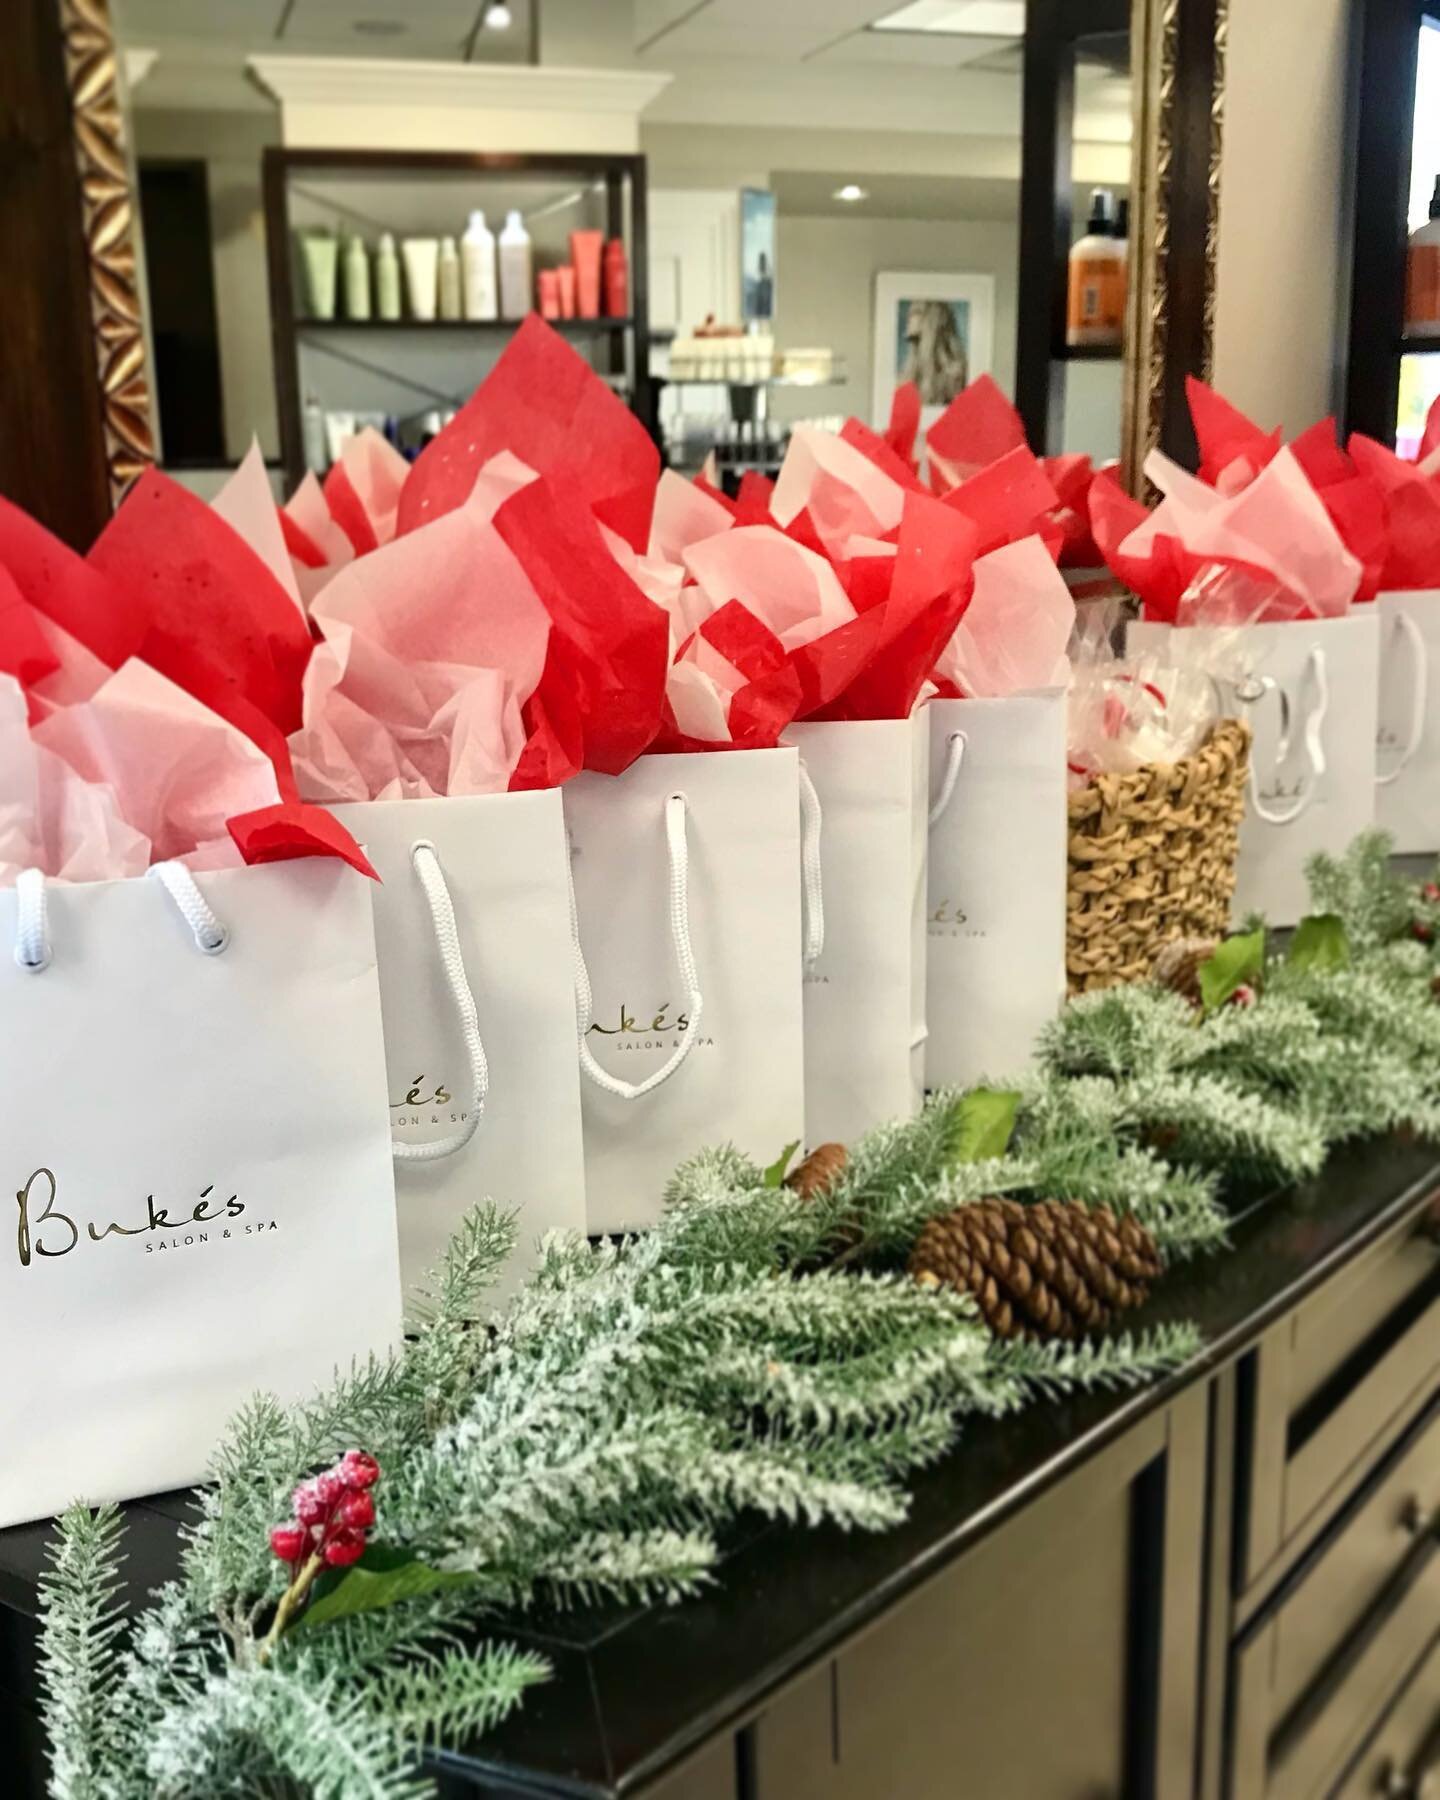 Feeling festive ❤️ And with each gift card purchase, receive a complimentary travel size shampoo &amp; conditioner from Buk&eacute;s exclusive line {which also make the best stocking stuffers!} #bukesalon #chicagosalon #chicagospa #giftcard #holidayg